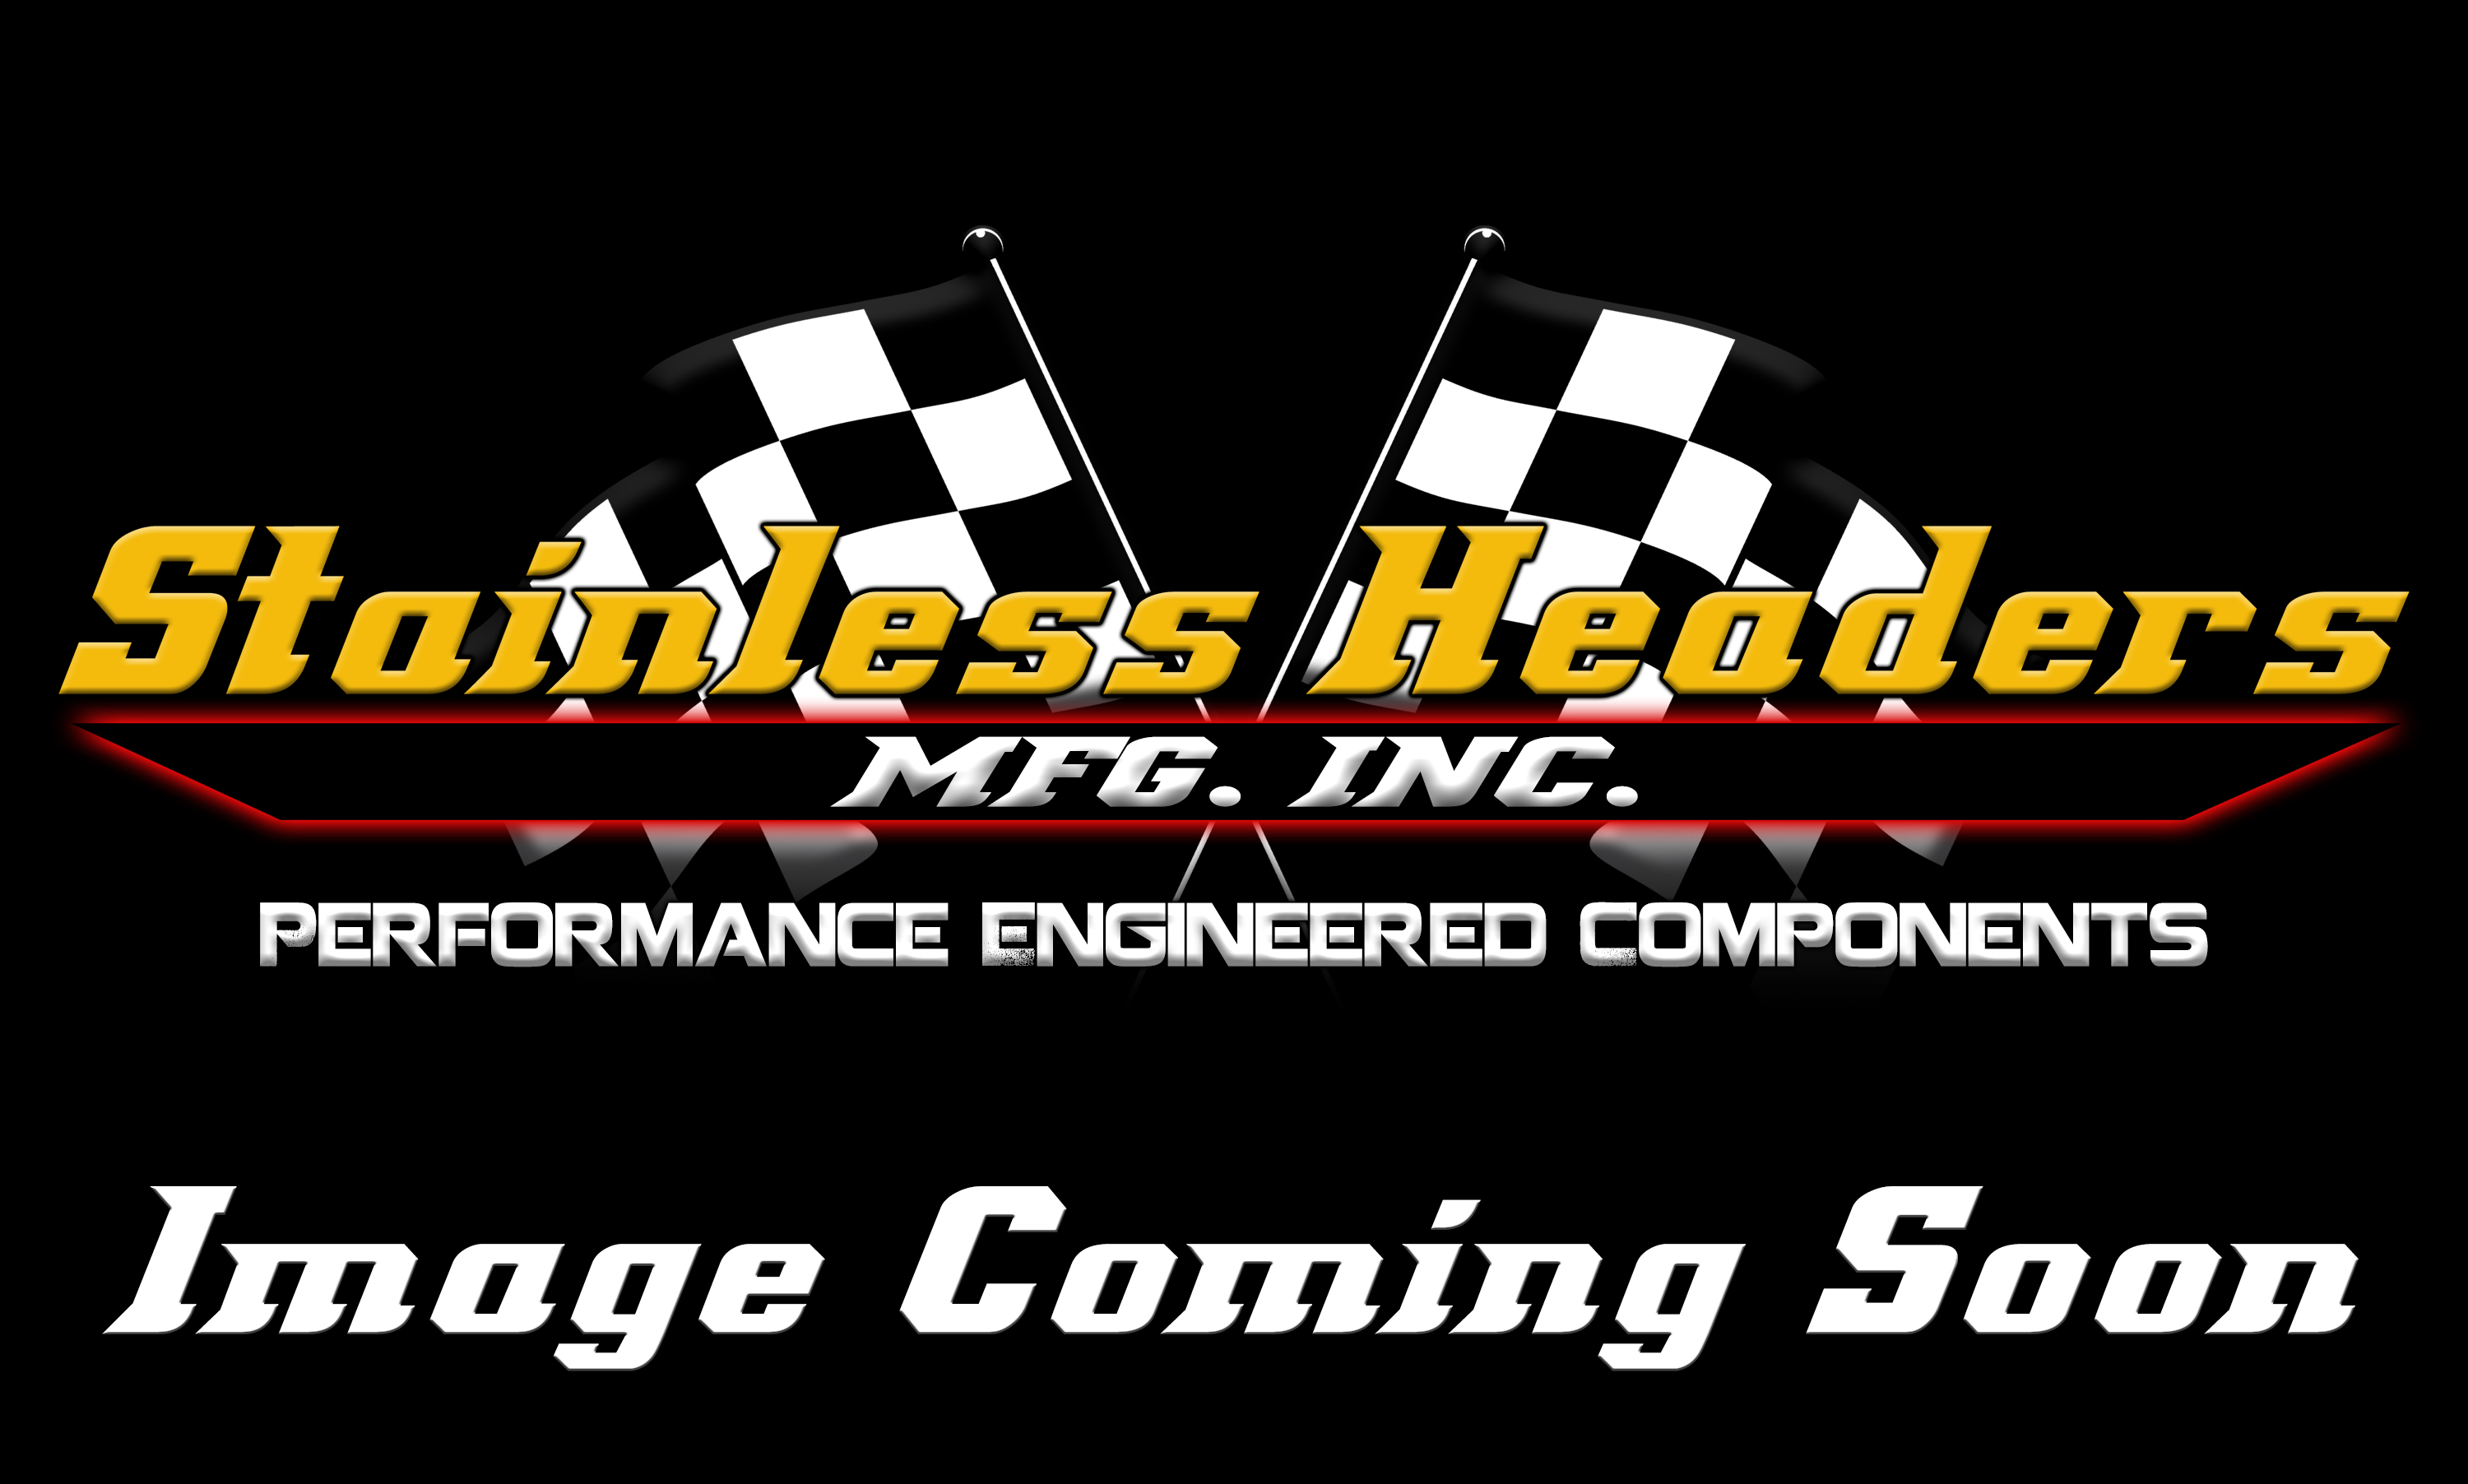 Merge Collectors - 321 Stainless Steel Merge Collectors - Stainless Headers - 2 1/4" Primary 3 into 1 Performance Merge Collector-16ga 321ss